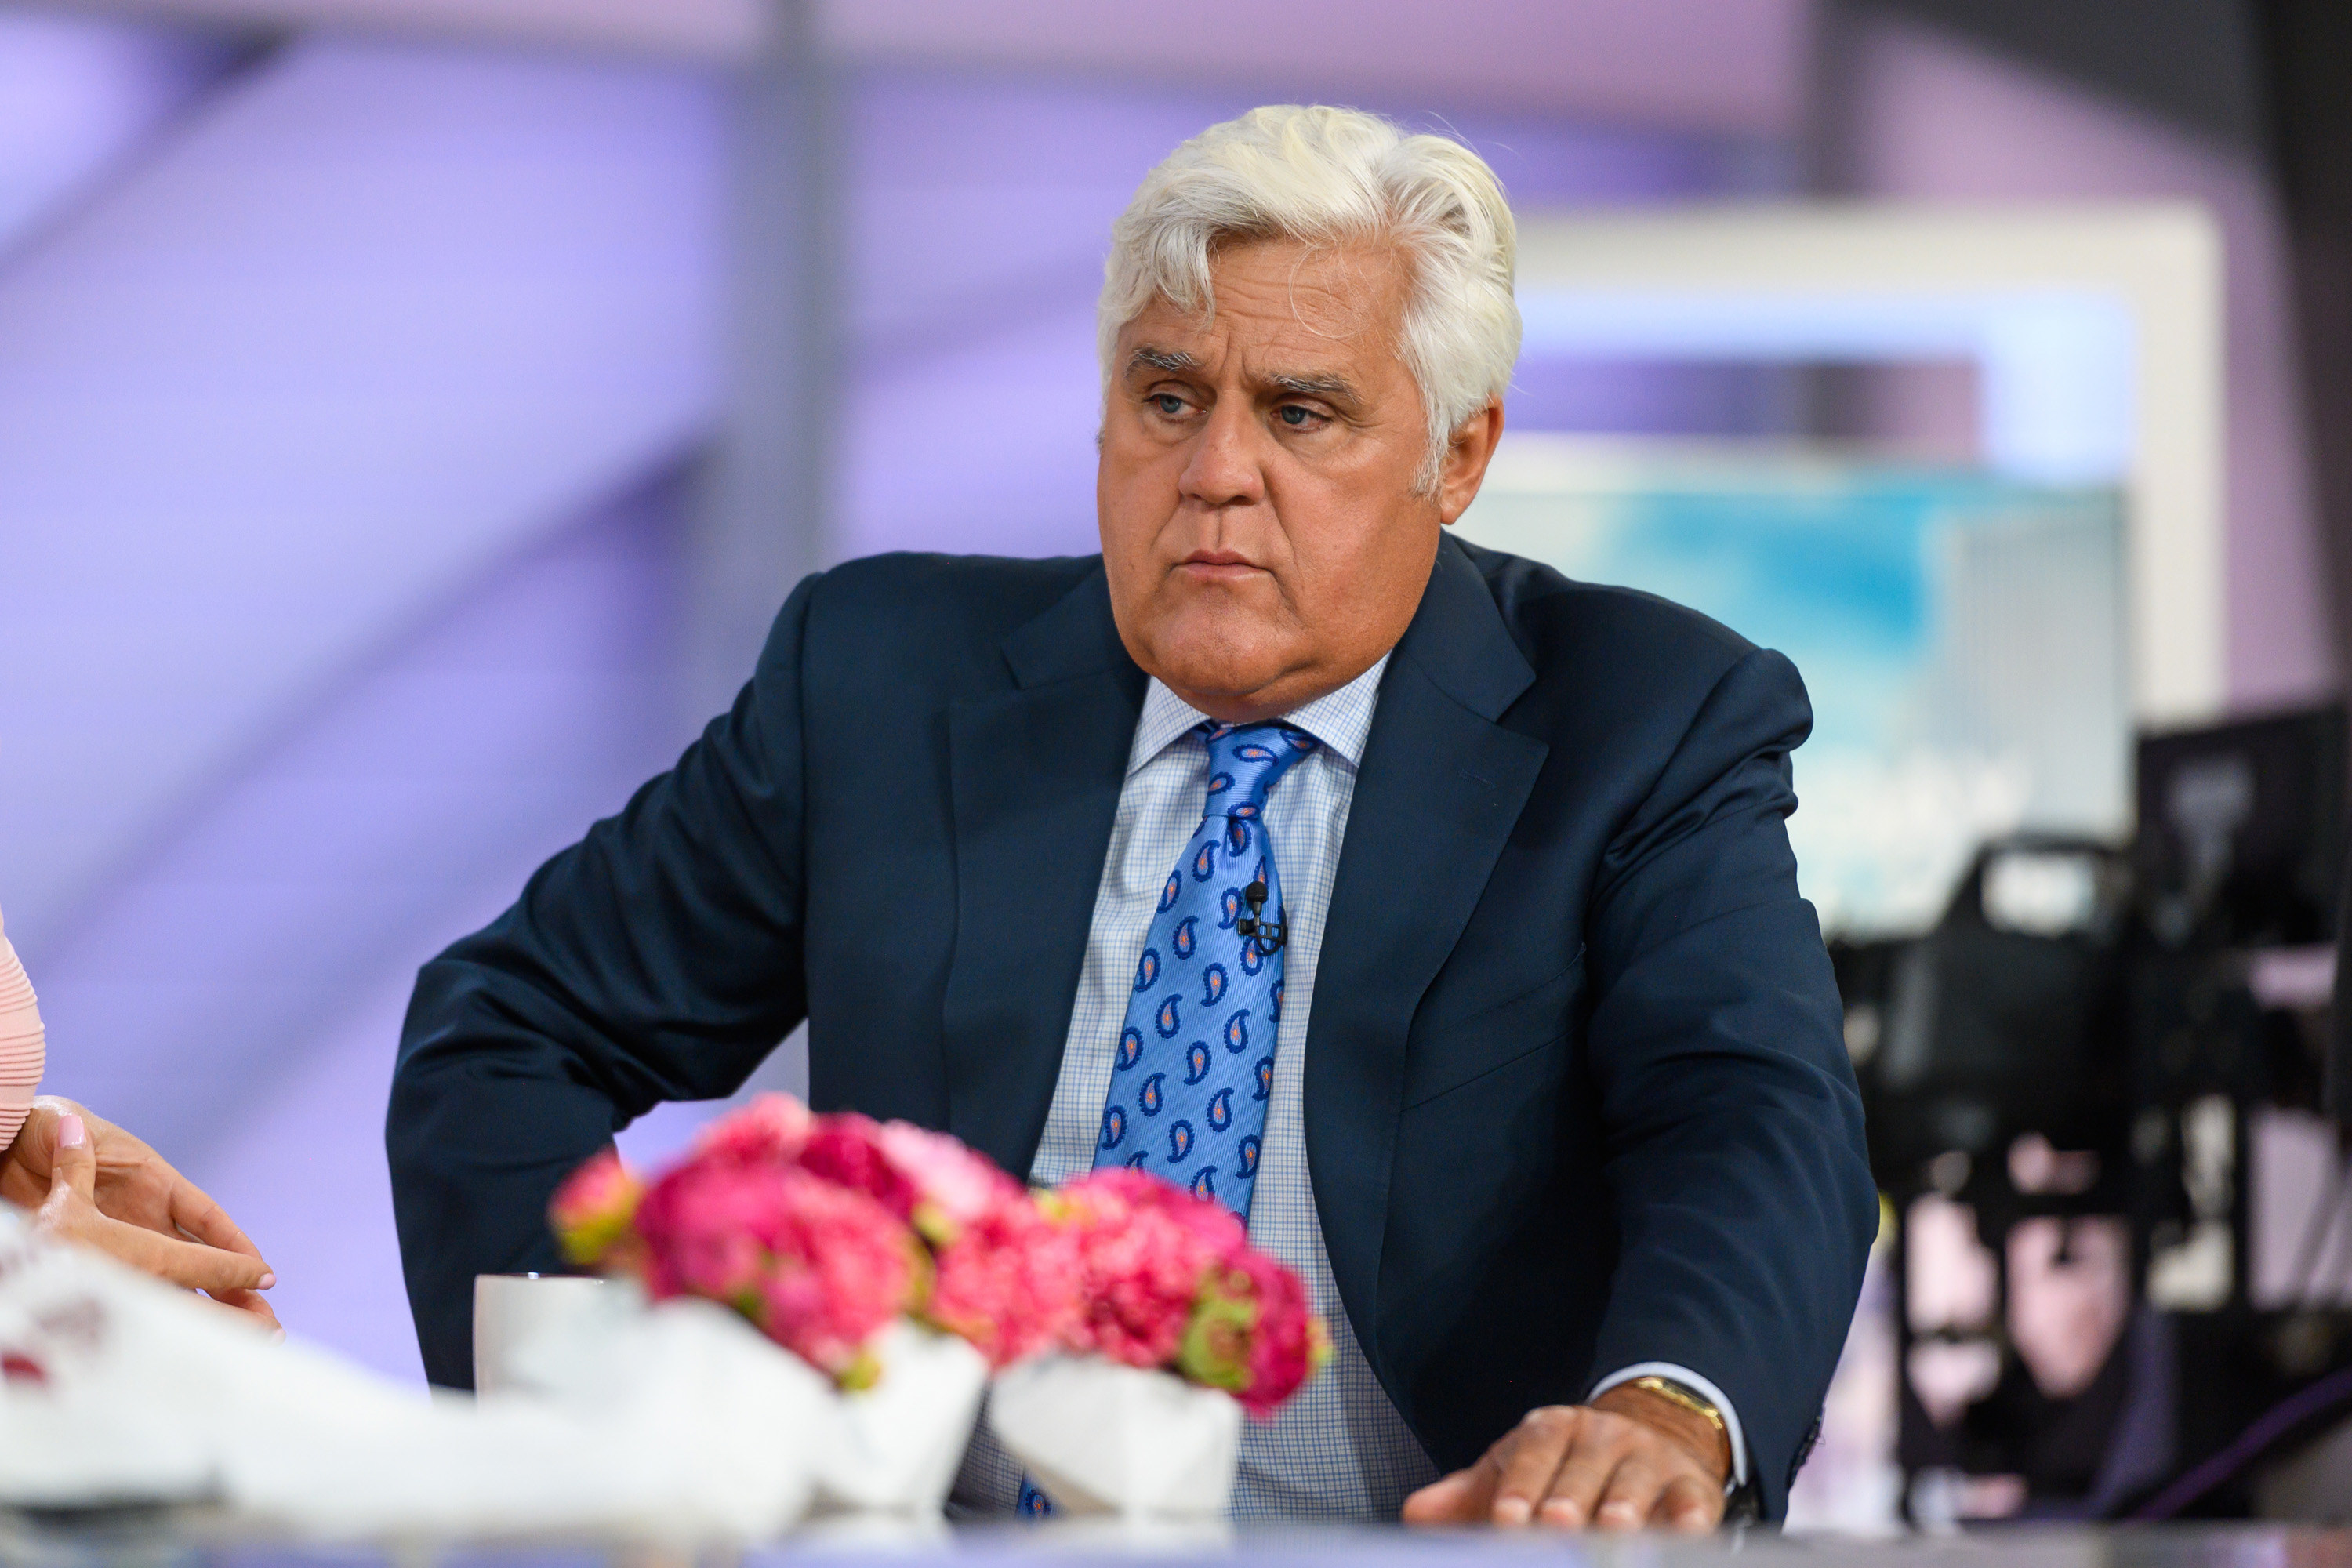 Jay Leno on the Today Show in August 2019